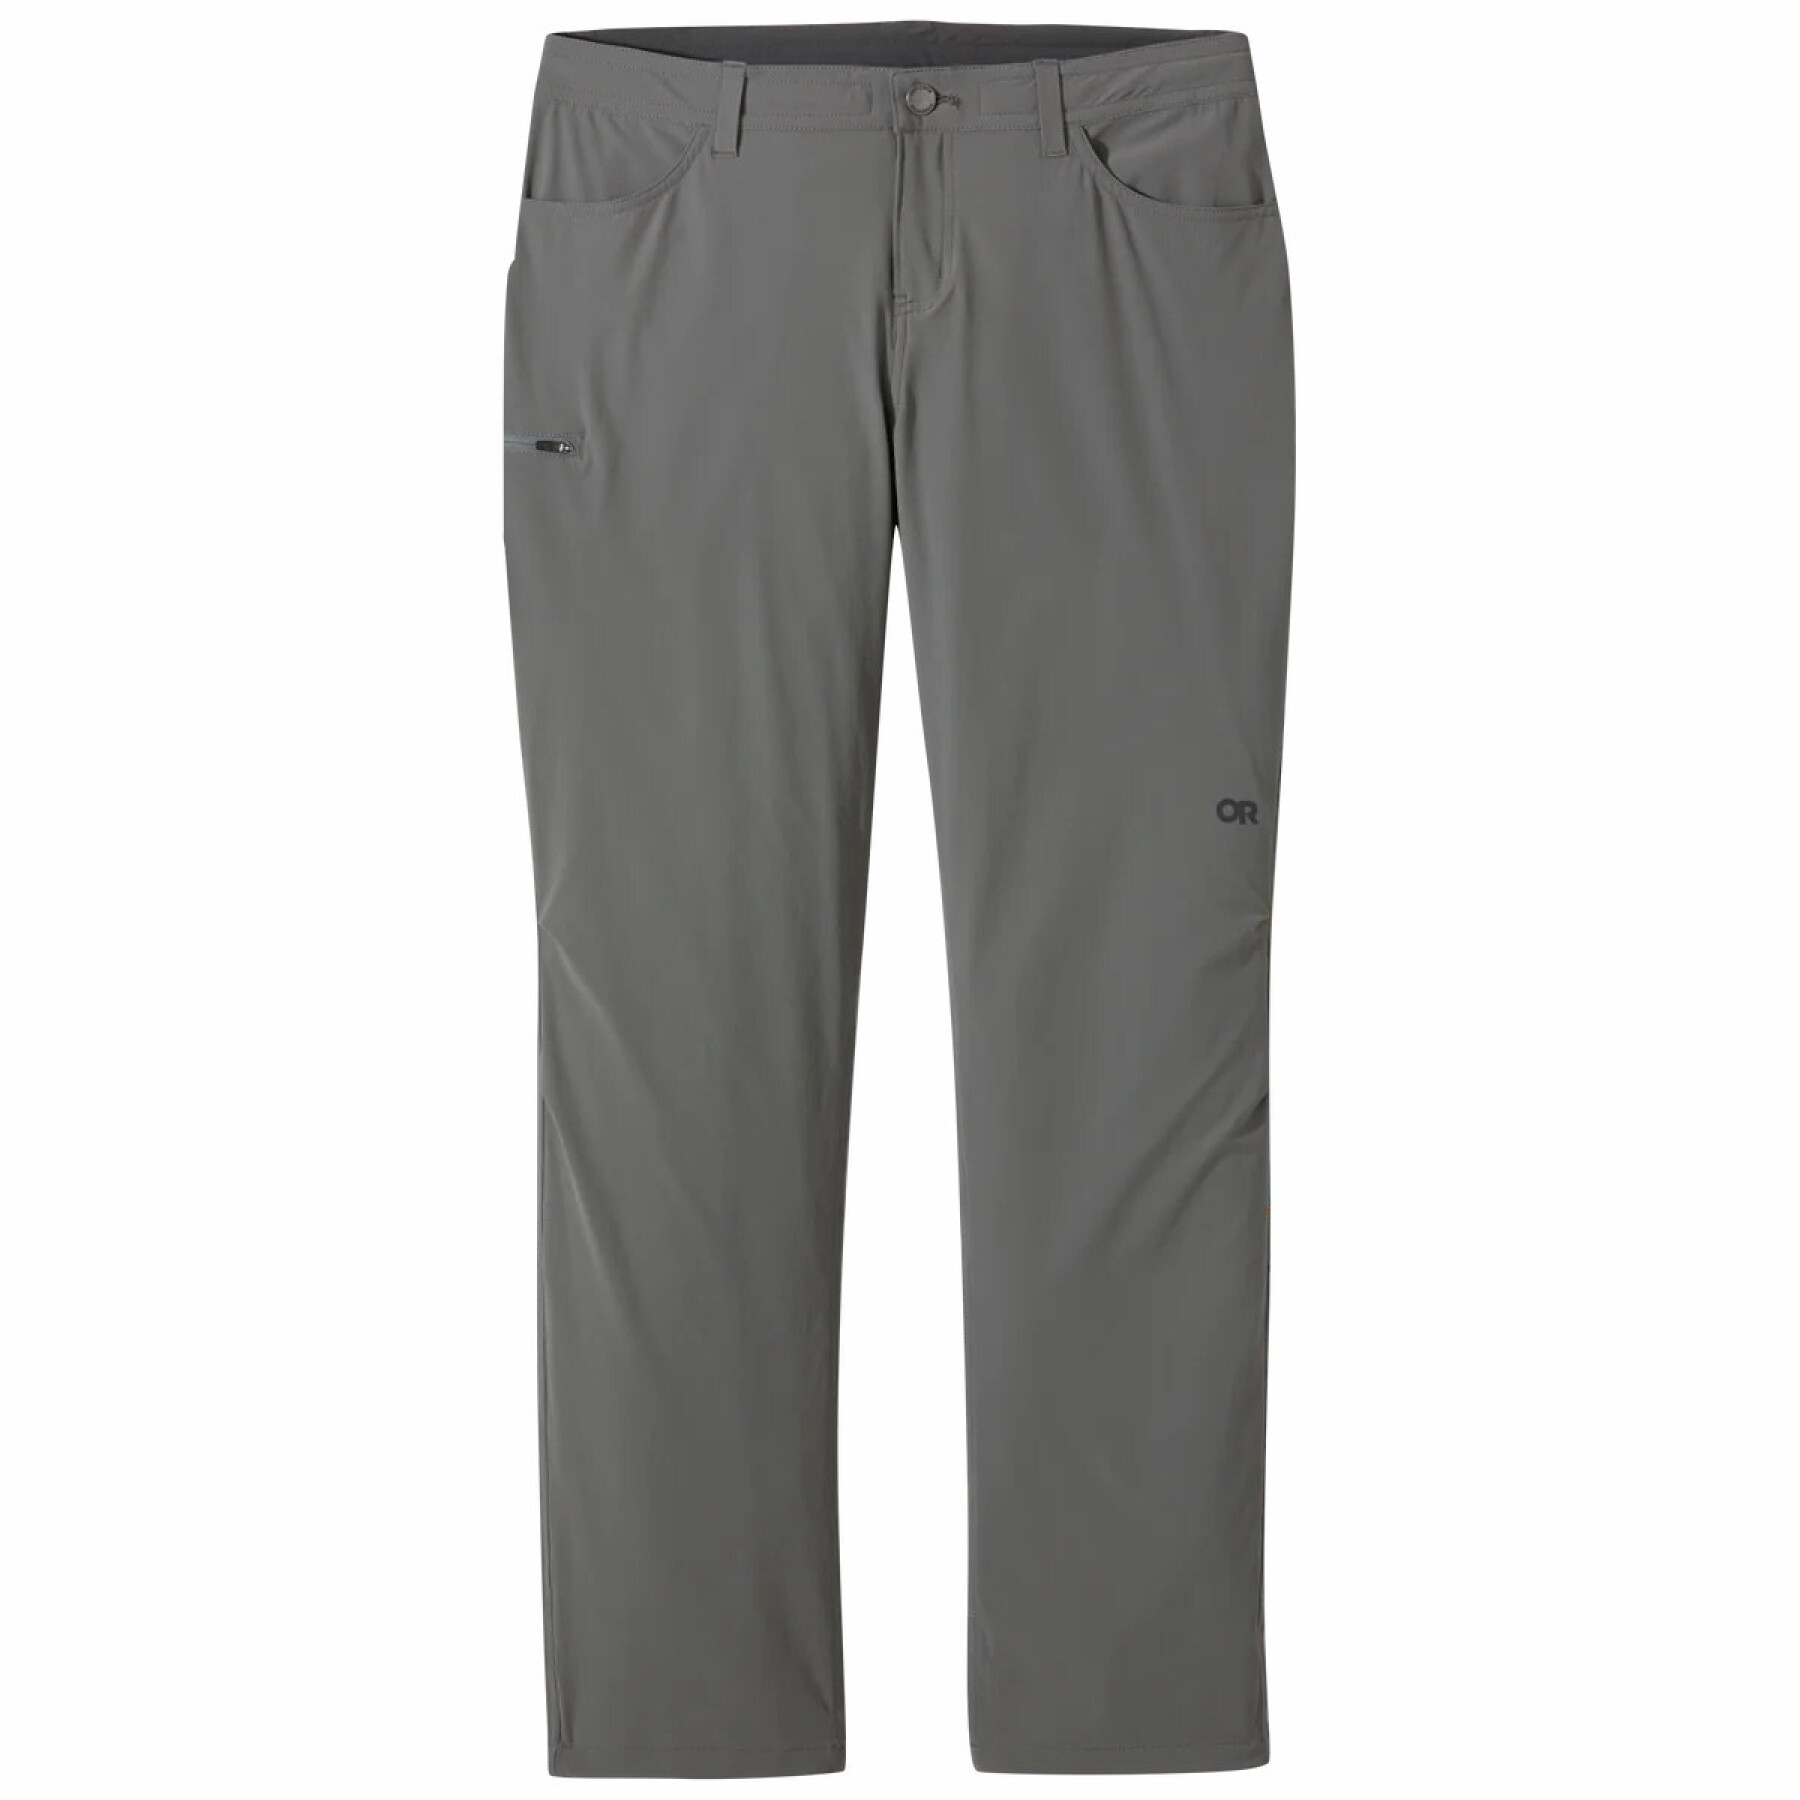 Women's crotch pants Outdoor Research Ferrosi